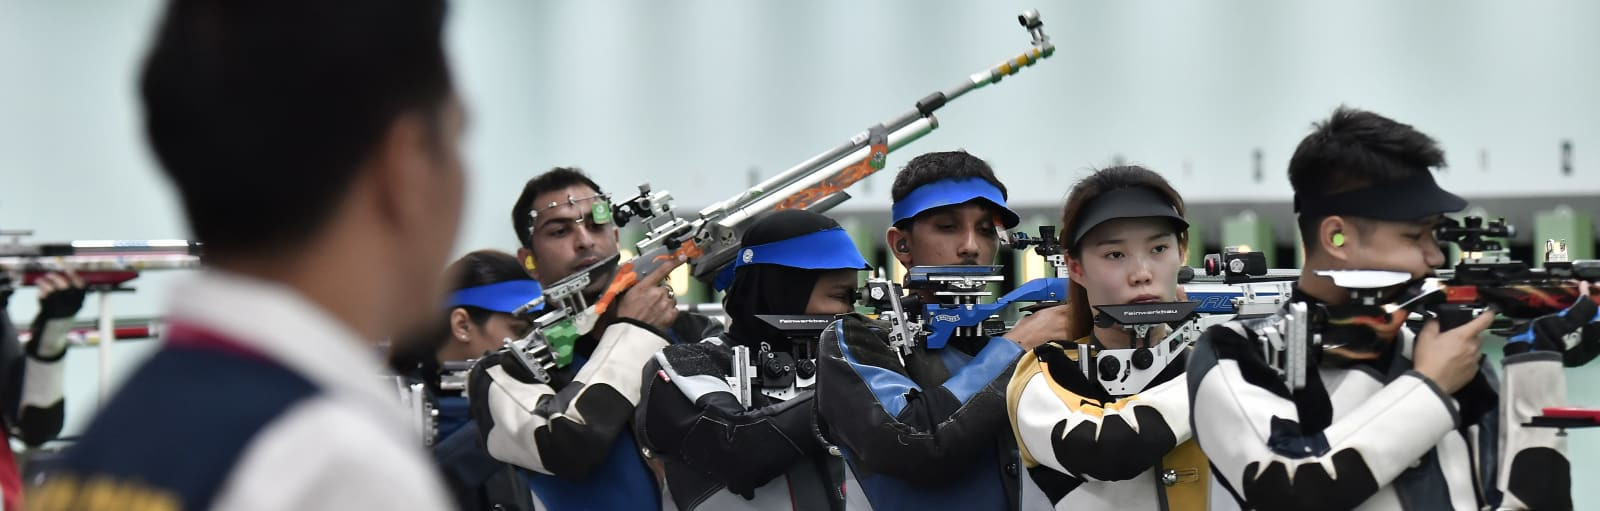 Two gold medals were won today in shooting ©Asian Games 2018